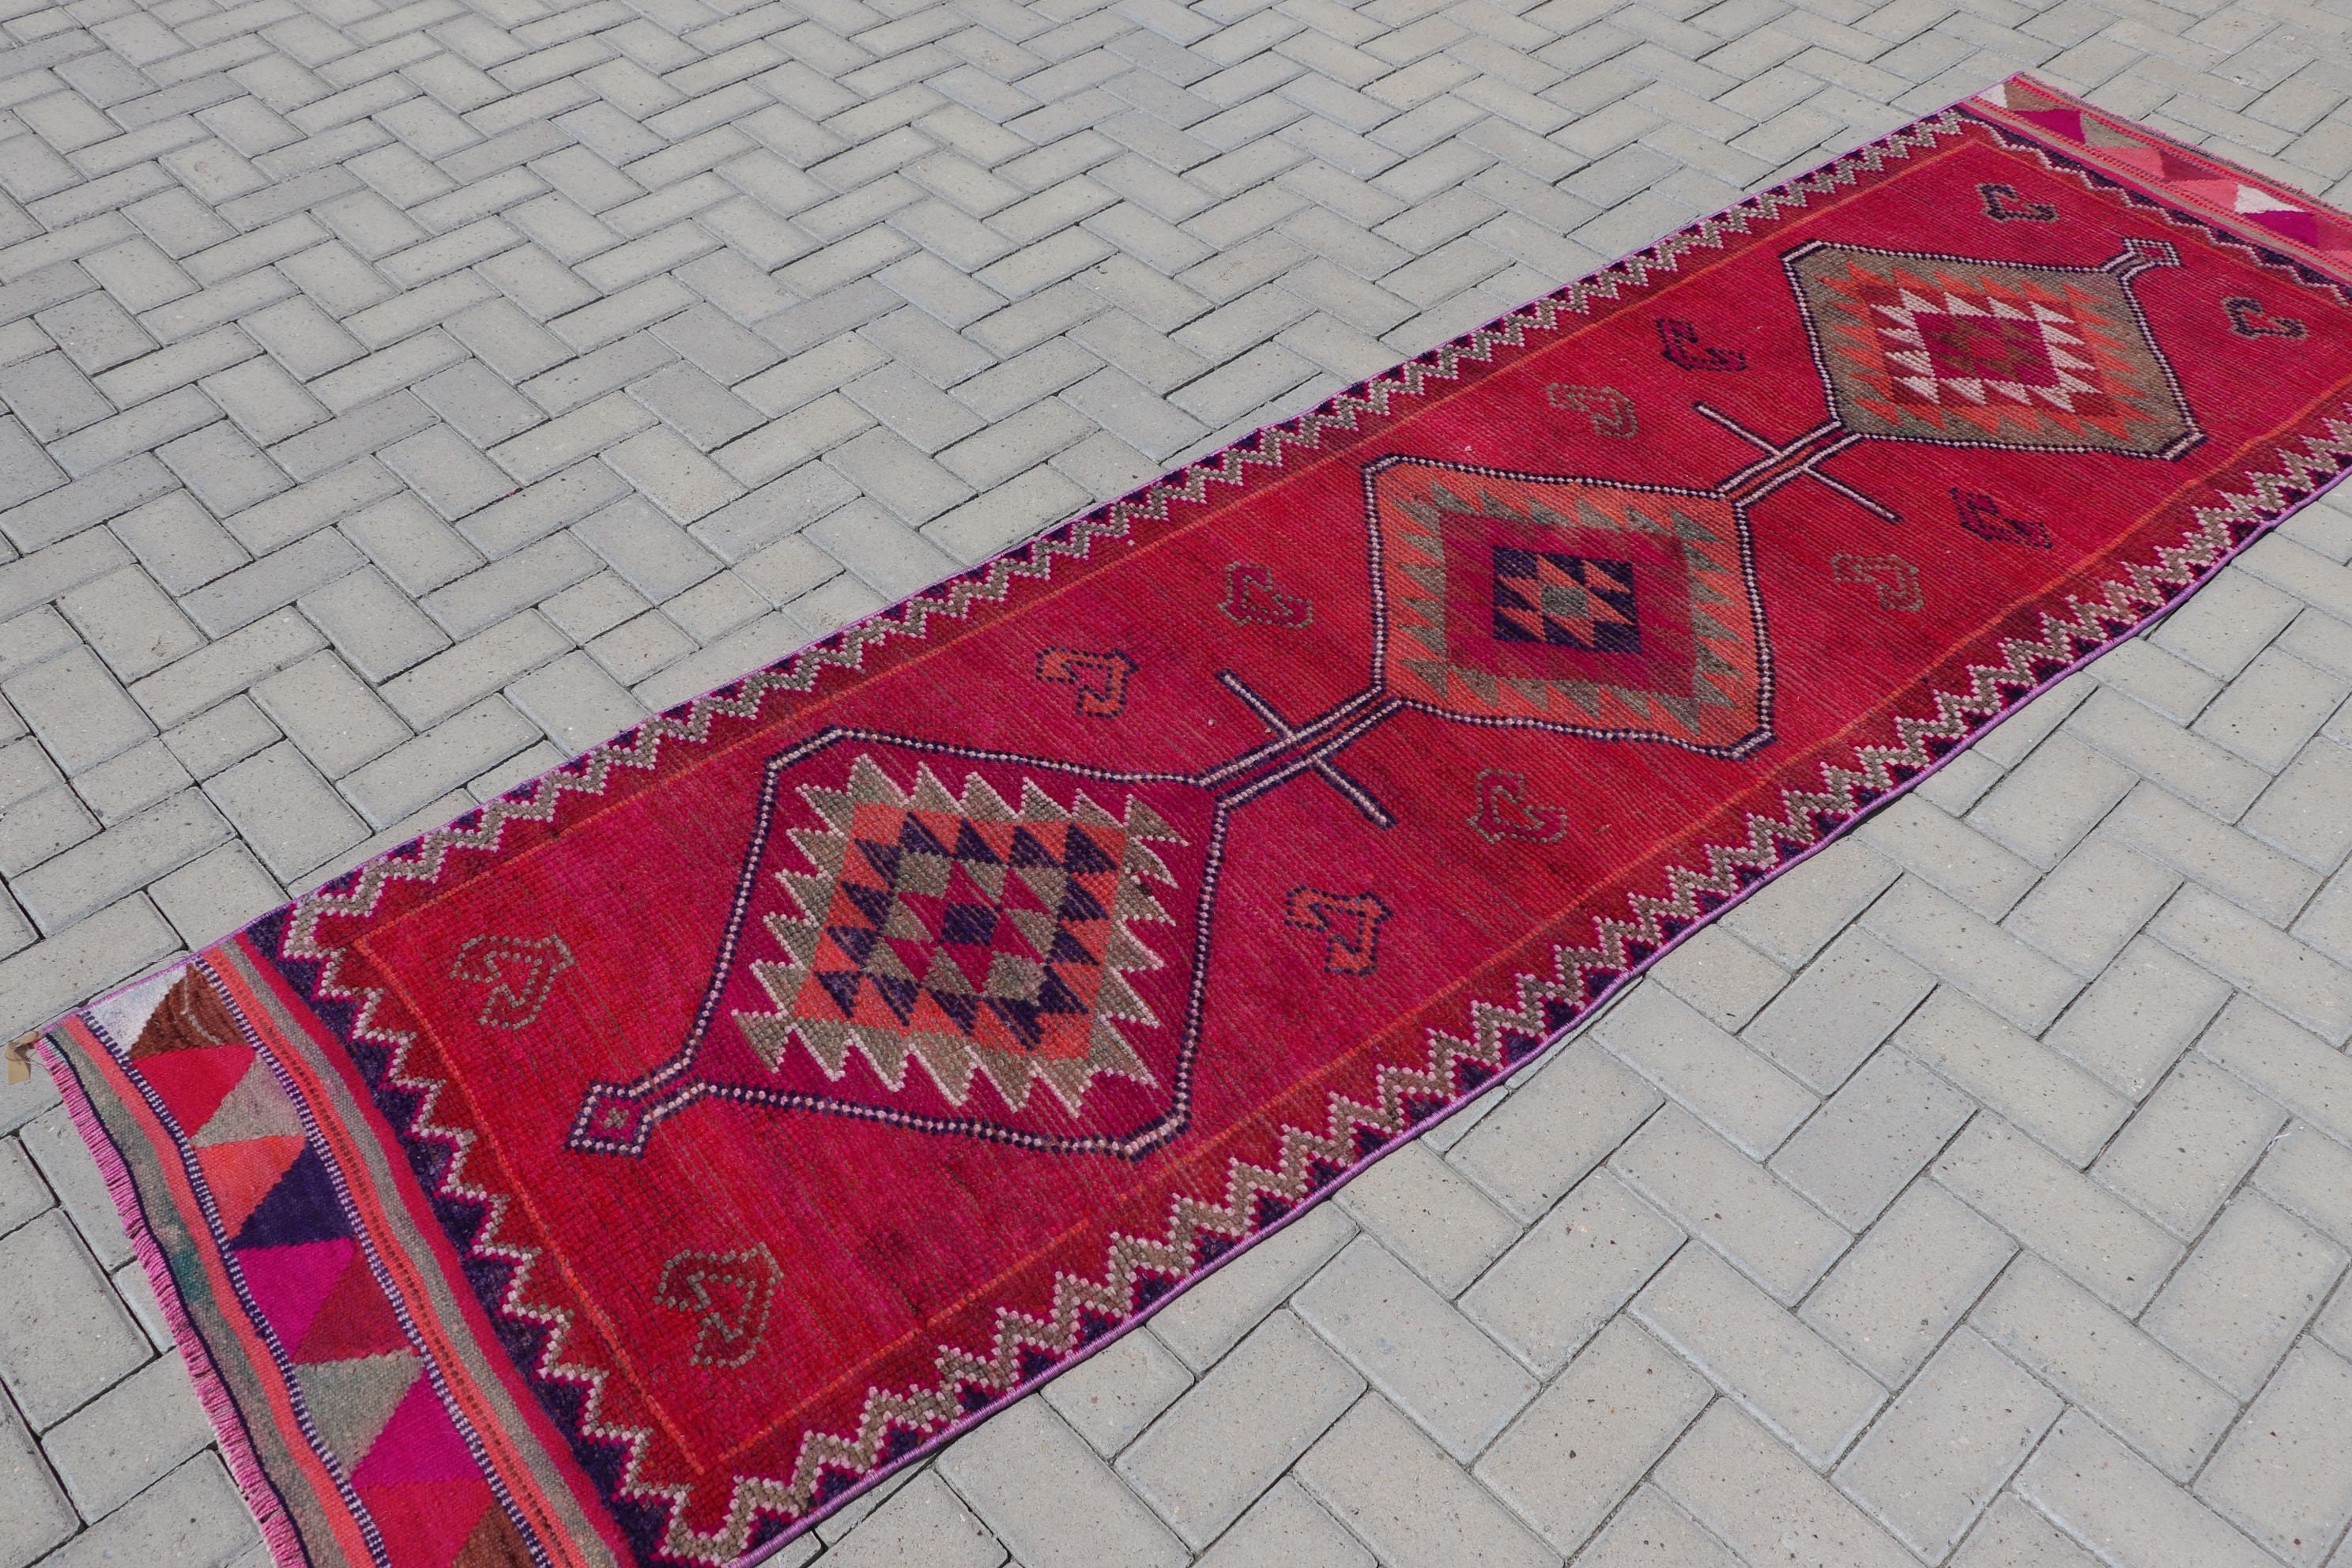 Moroccan Rugs, Pink Cool Rug, Home Decor Rug, 3x7 ft Accent Rug, Nursery Rug, Entry Rugs, Vintage Rug, Turkish Rug, Rugs for Entry, Old Rug